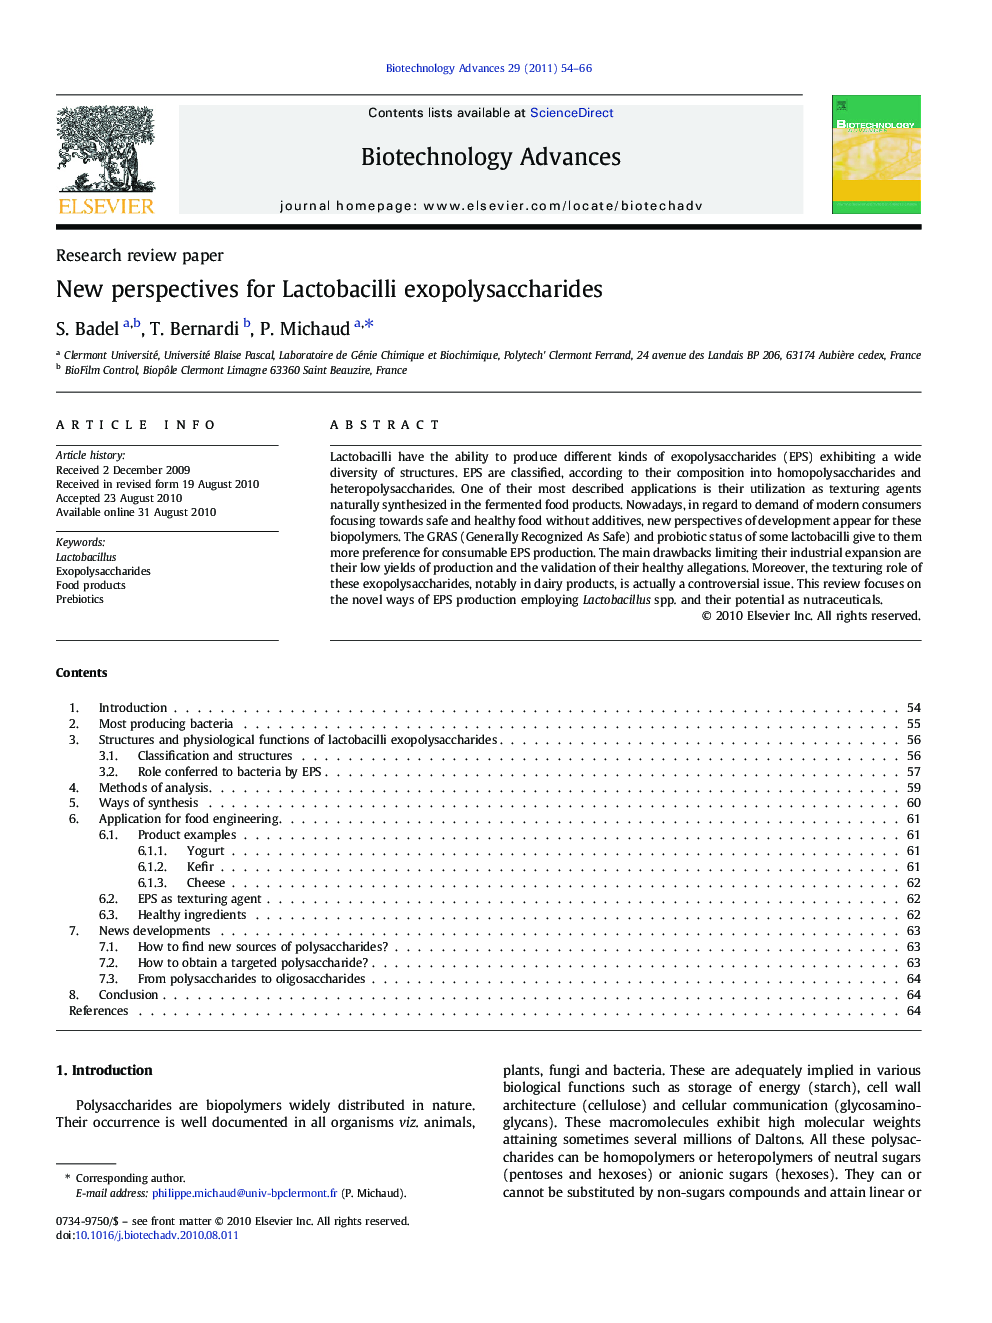 New perspectives for Lactobacilli exopolysaccharides